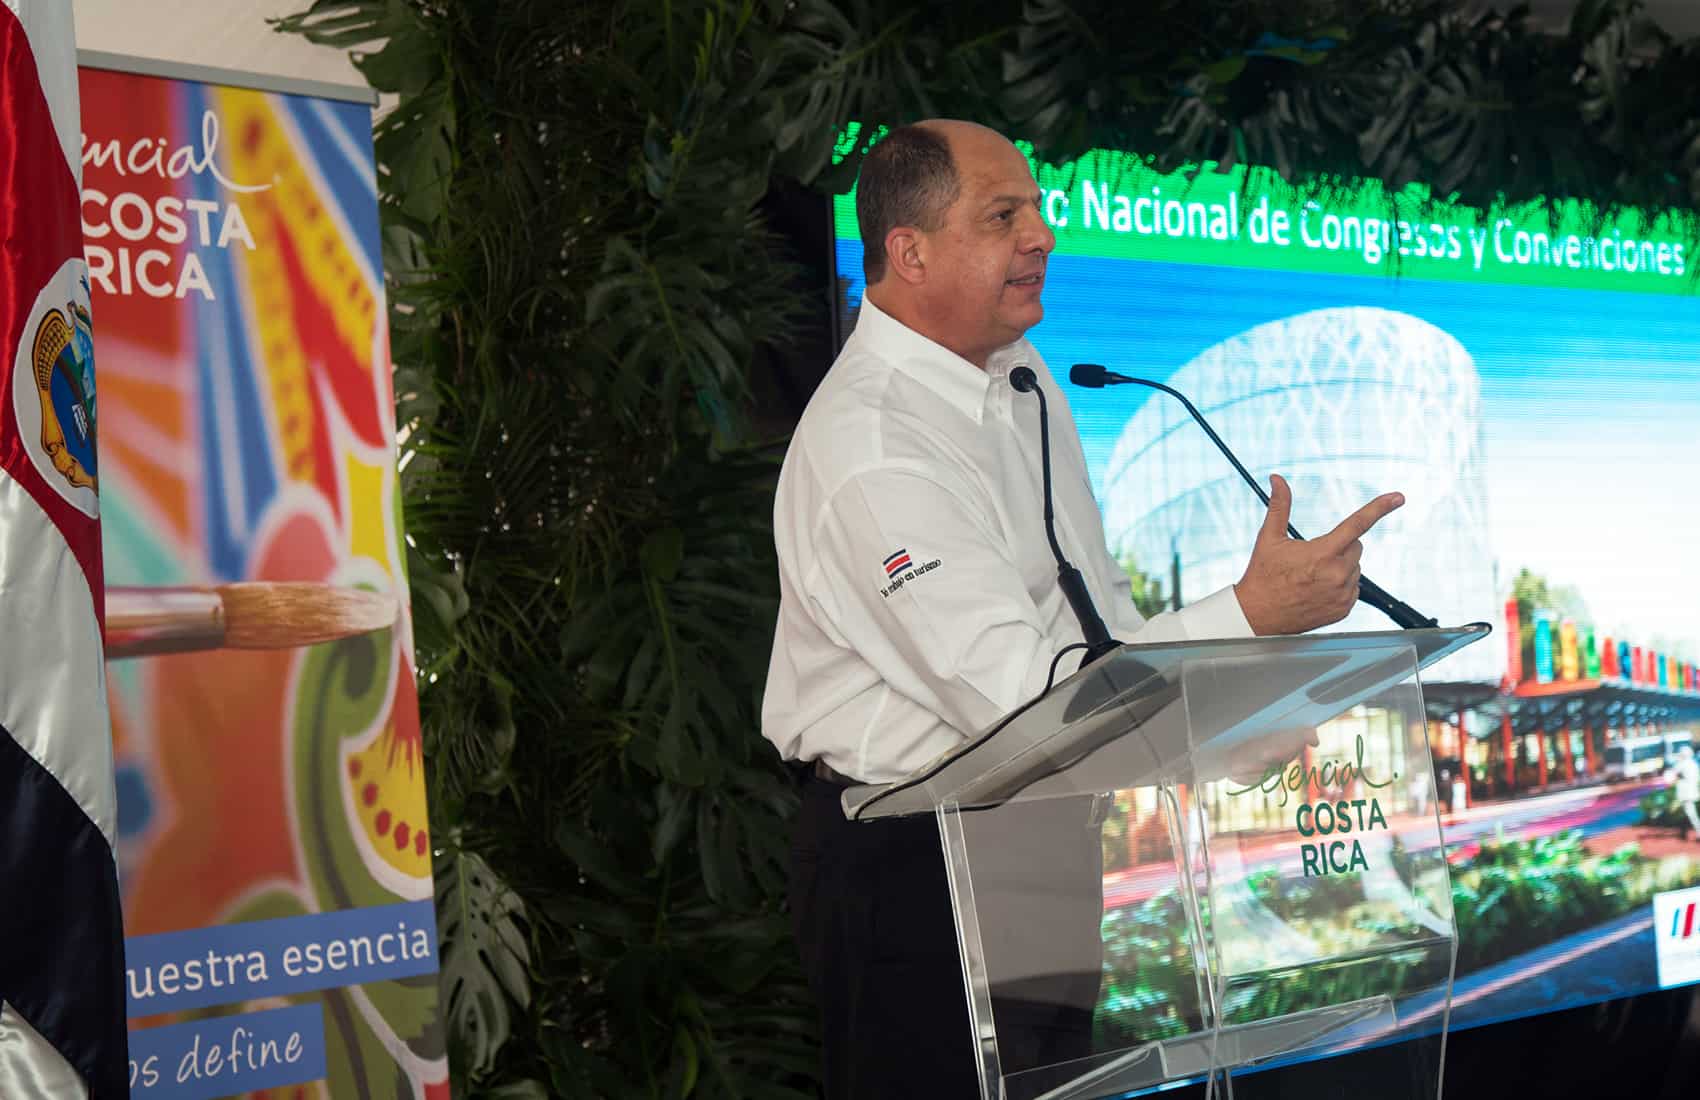 President Luis Guillermo Solís presents Costa Rica convention center on Dec. 10, 2015